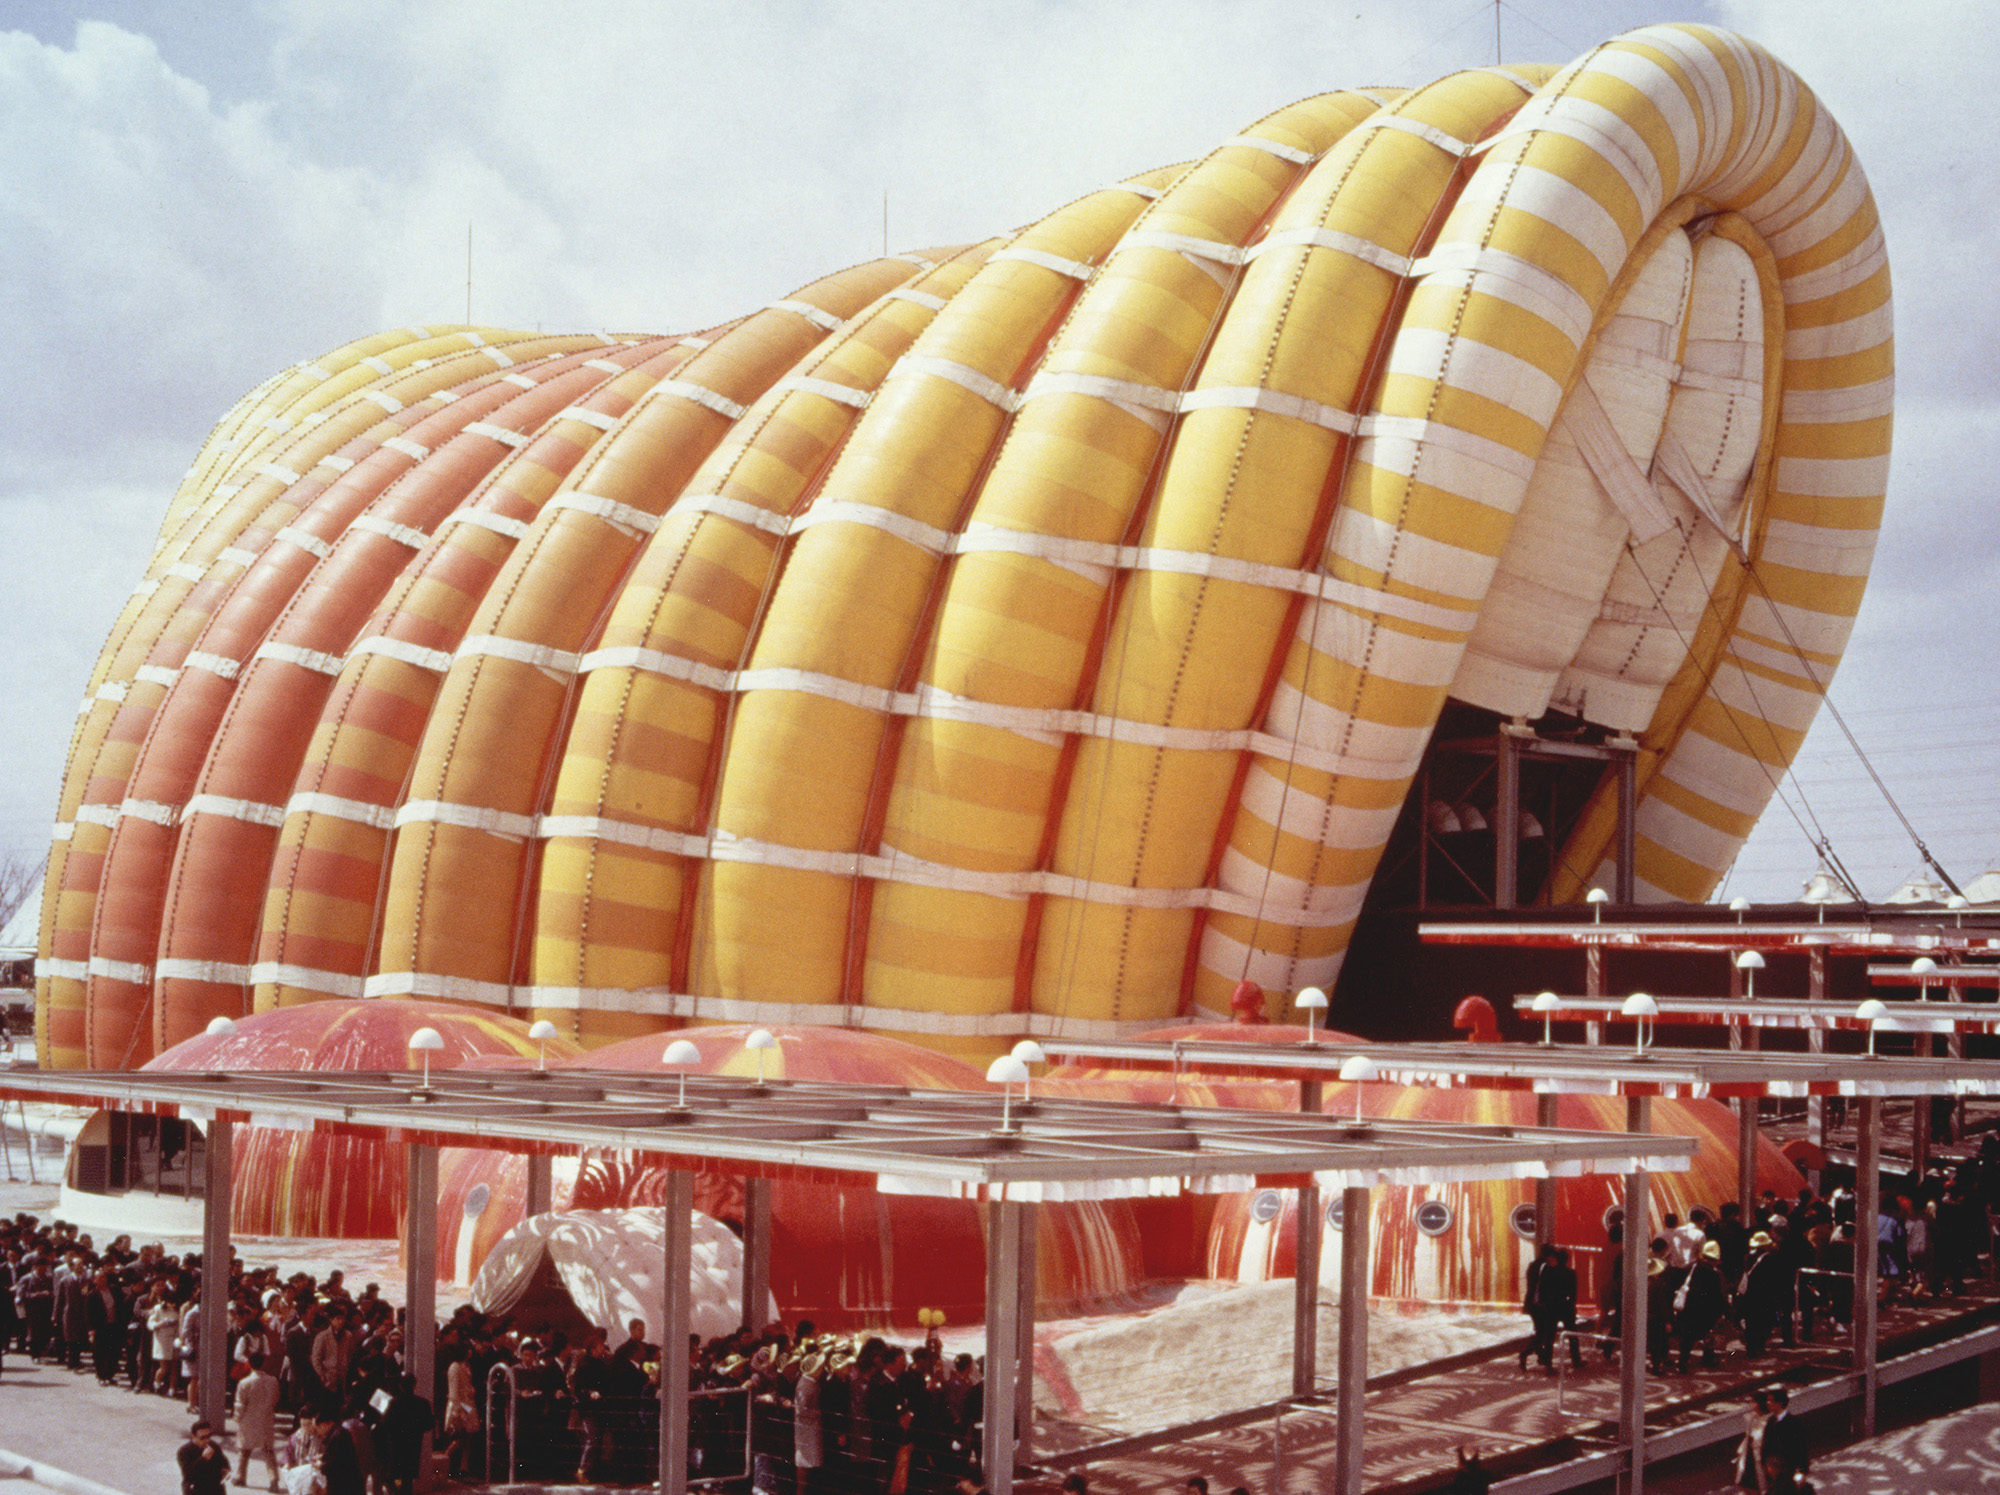 A large yellow and orange inflatable structure built in Japan